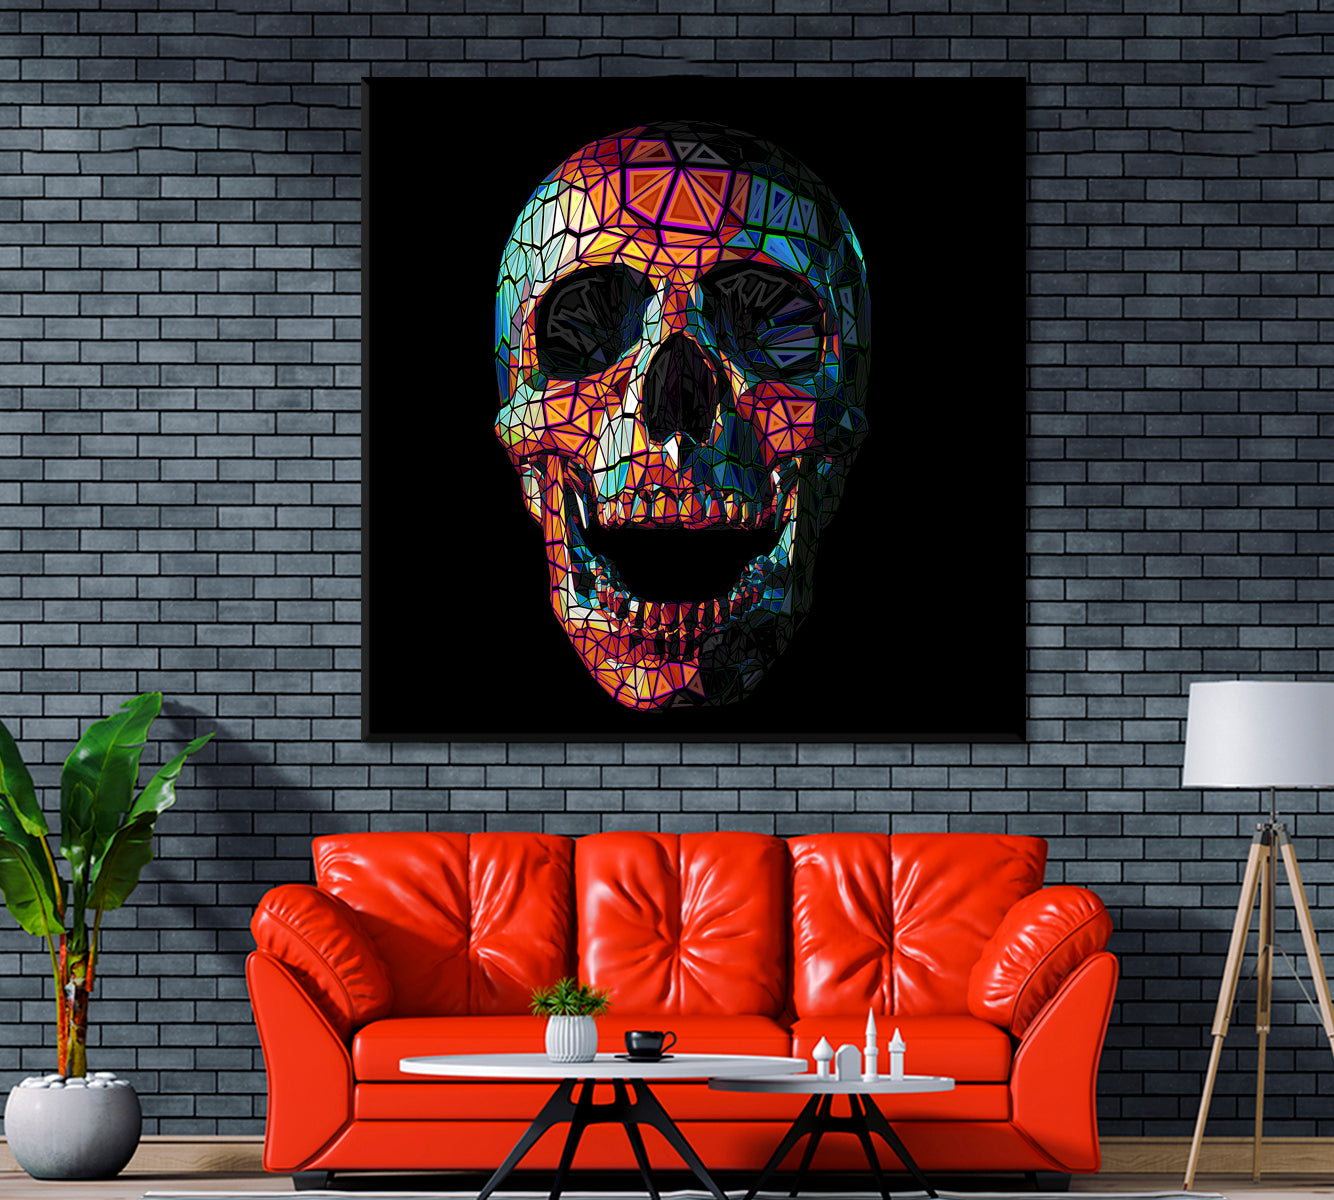 Colorful Skull Canvas Print ArtLexy 1 Panel 12"x12" inches 